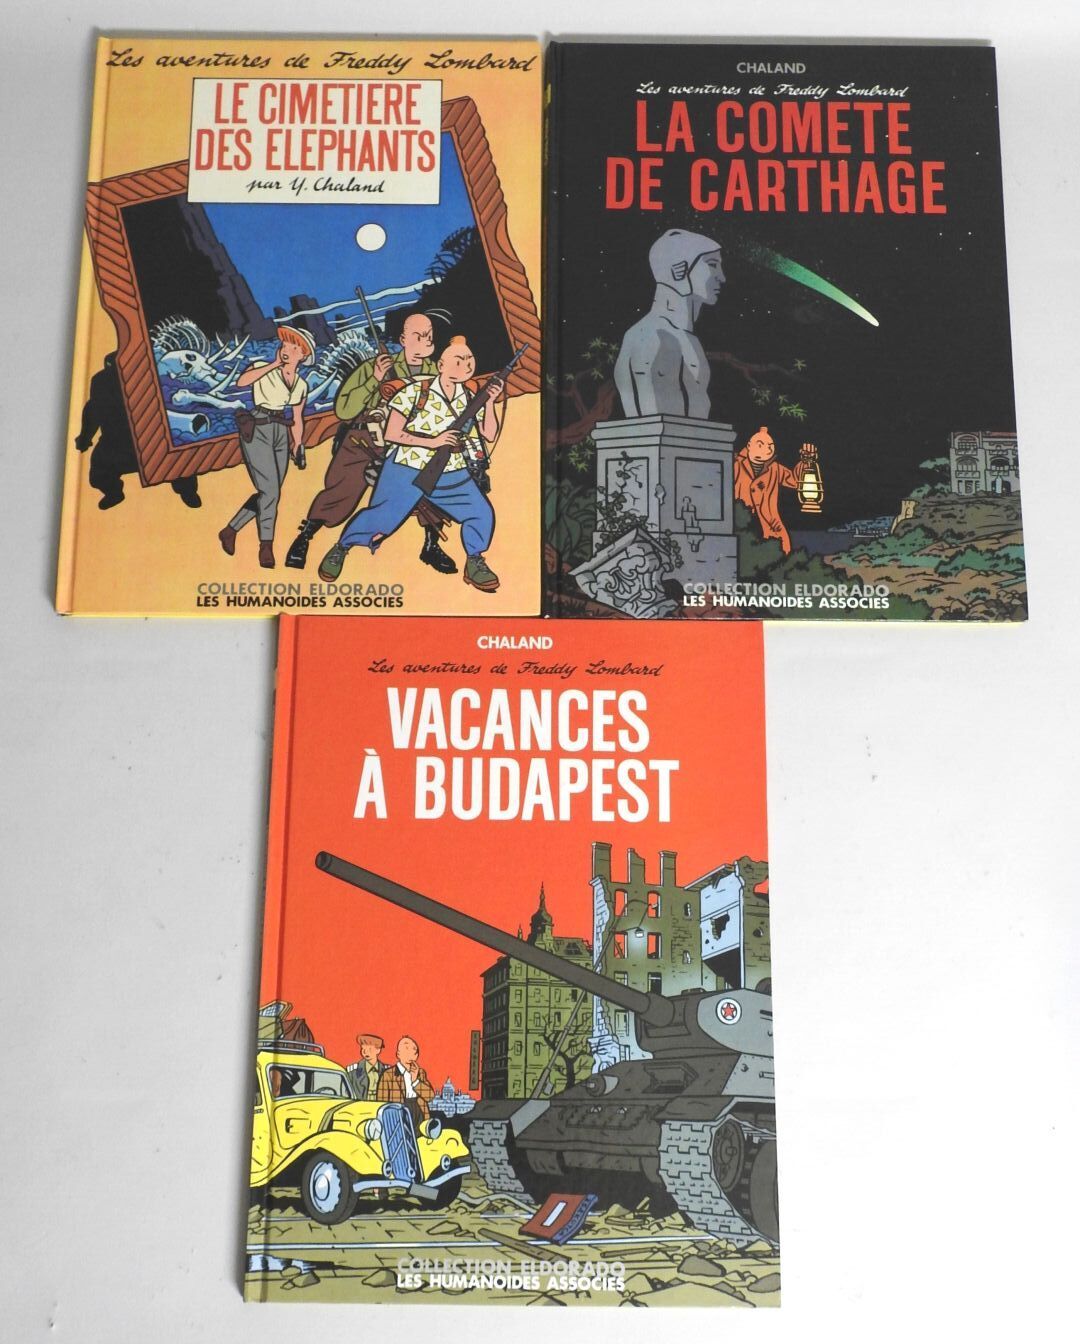 Chaland, Les aventures de Freddy Lombard Barge, The adventures of Freddy Lombard&hellip;